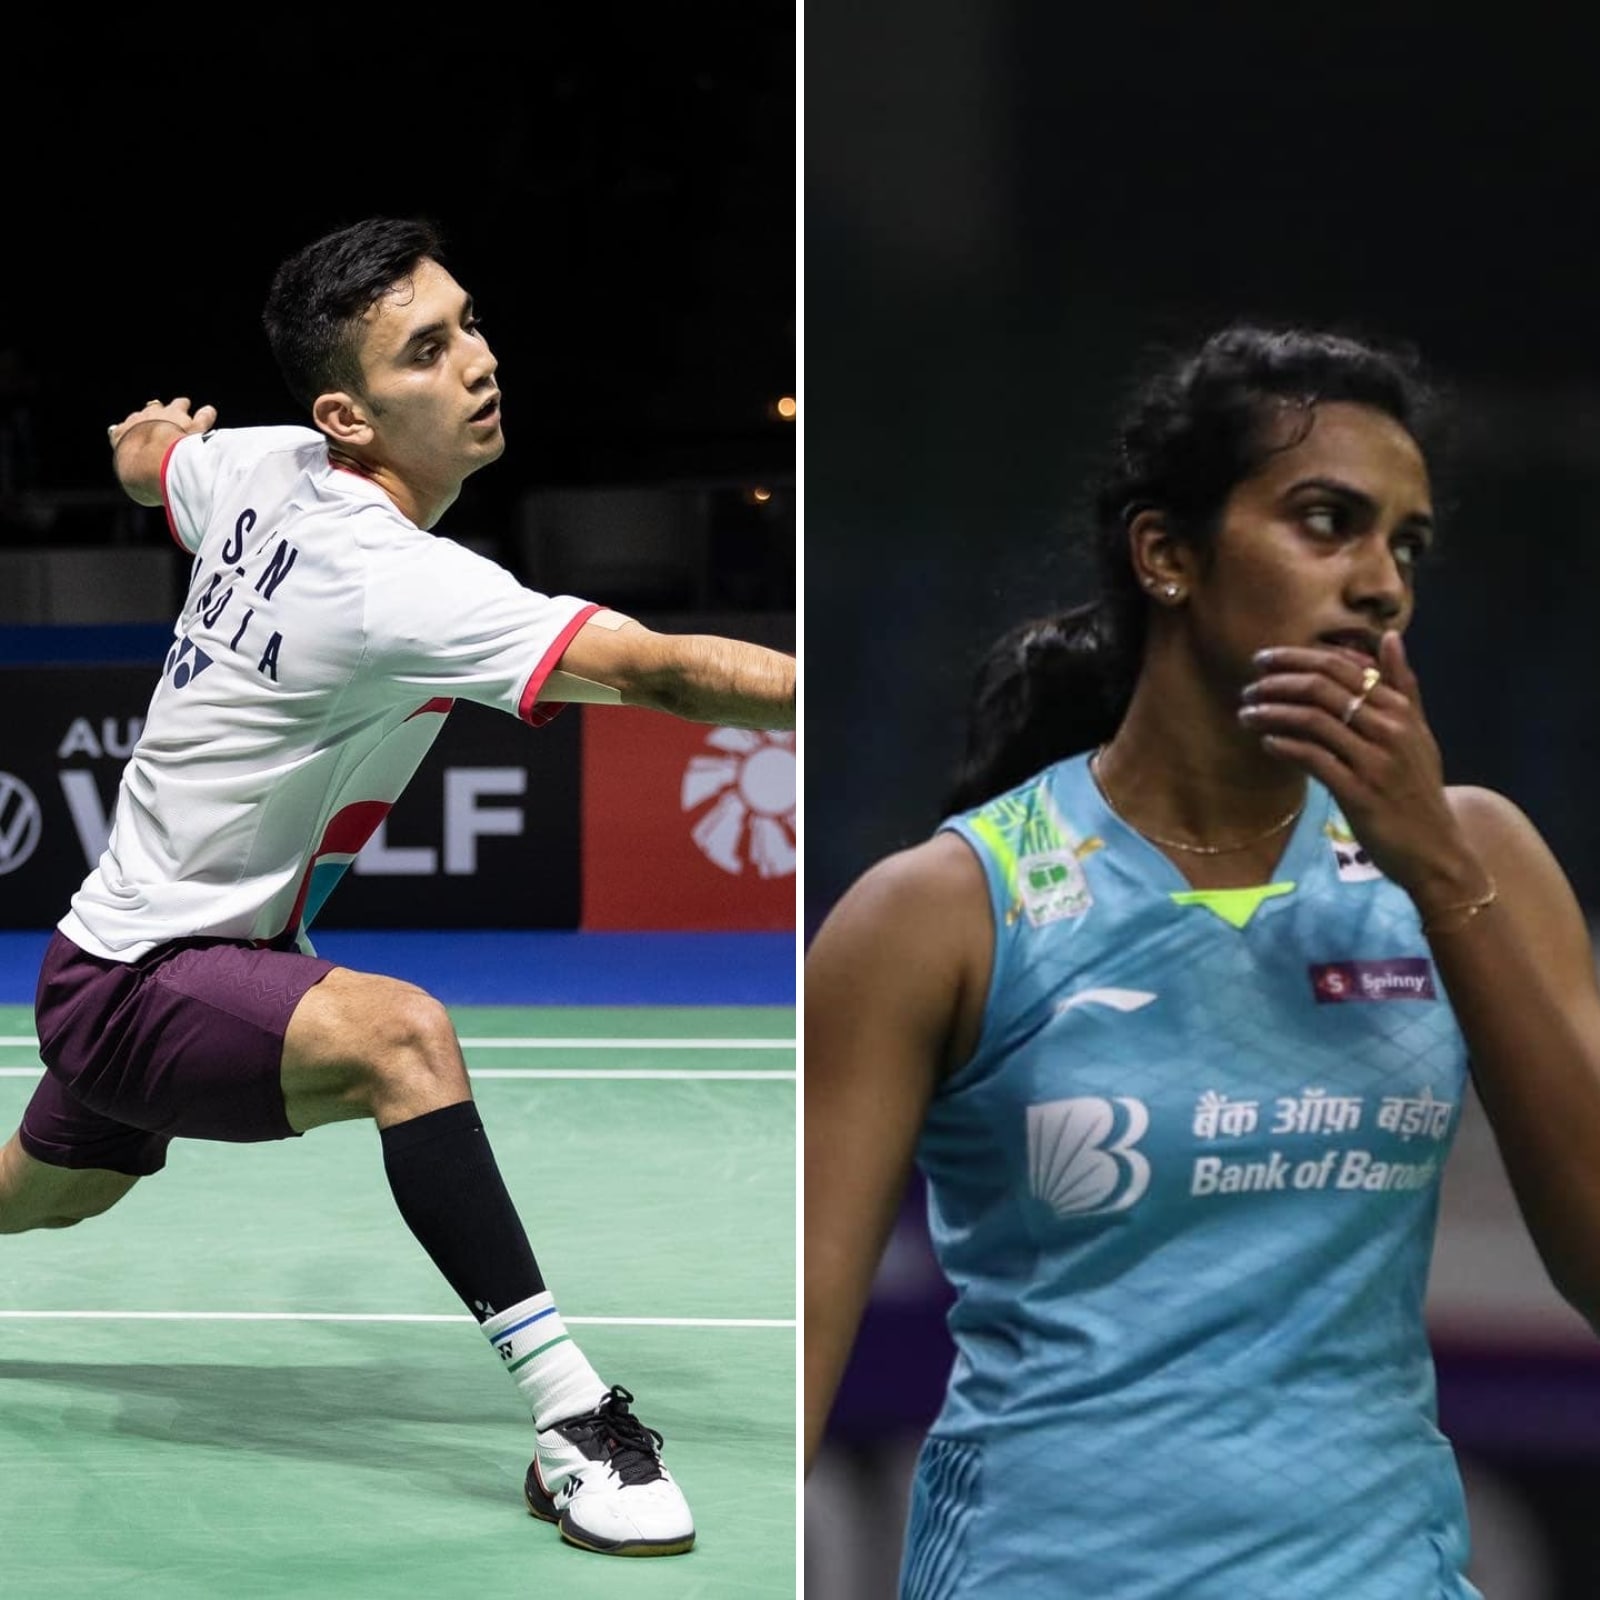 thomas cup 2022 streaming live